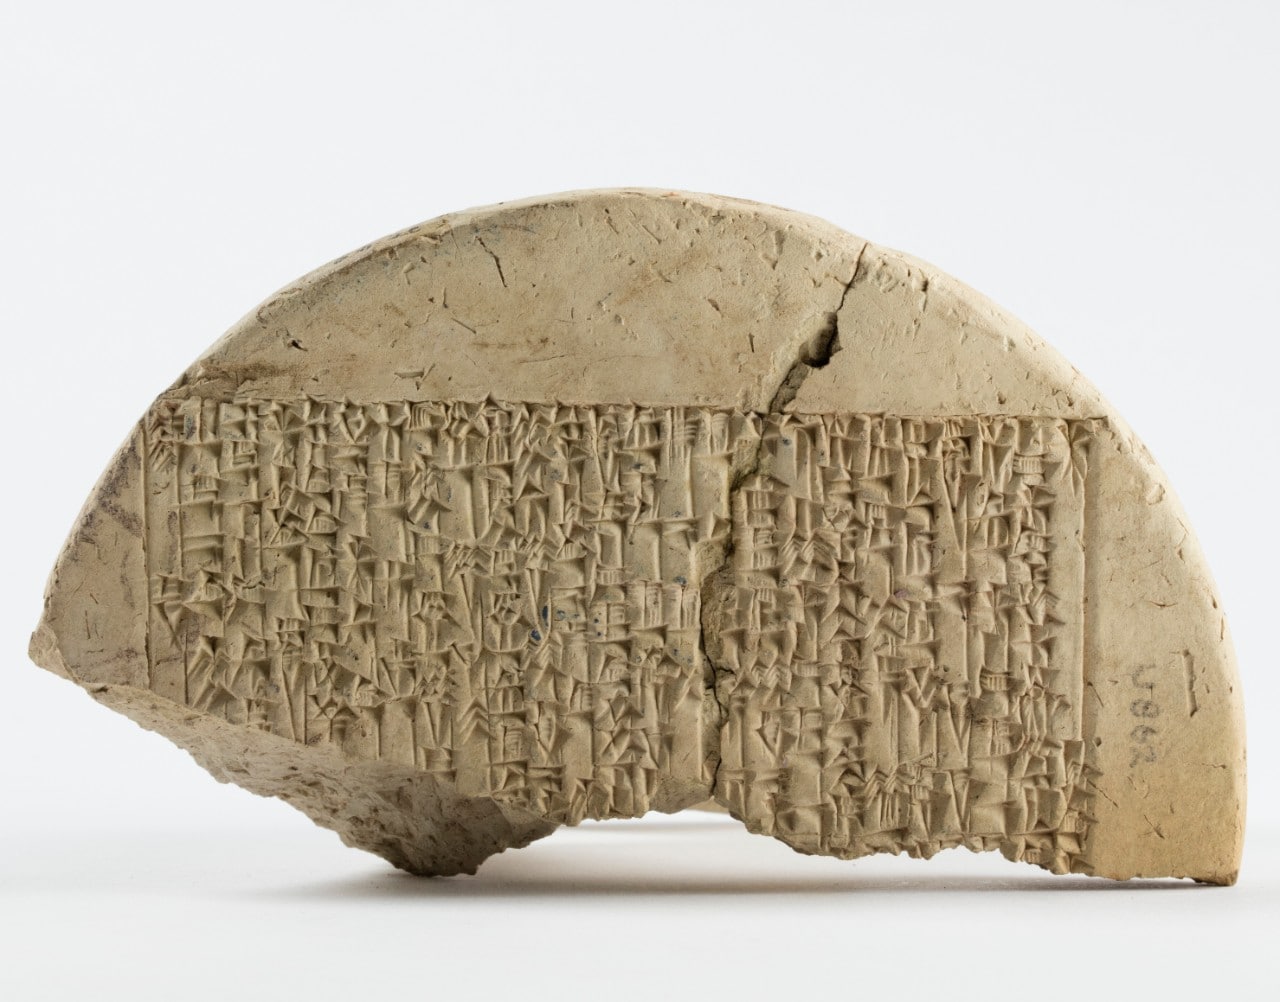 Cuneiform cone fragment, Old Babylonian period (1895-1595 BC), Ur, Iraq, excavated by the British Museum and University of Pennsylvania, 1922–34.